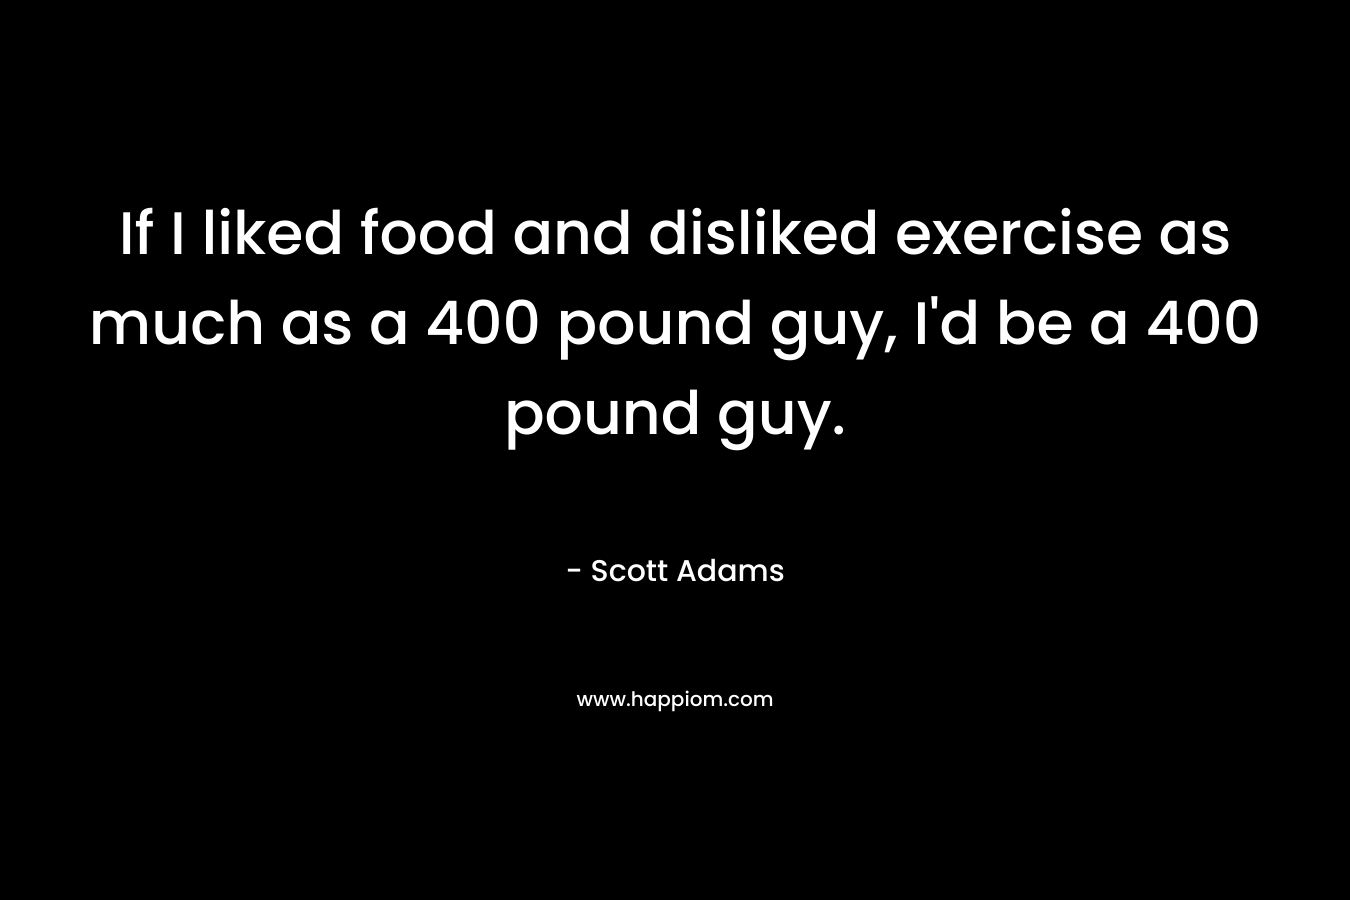 If I liked food and disliked exercise as much as a 400 pound guy, I’d be a 400 pound guy. – Scott Adams